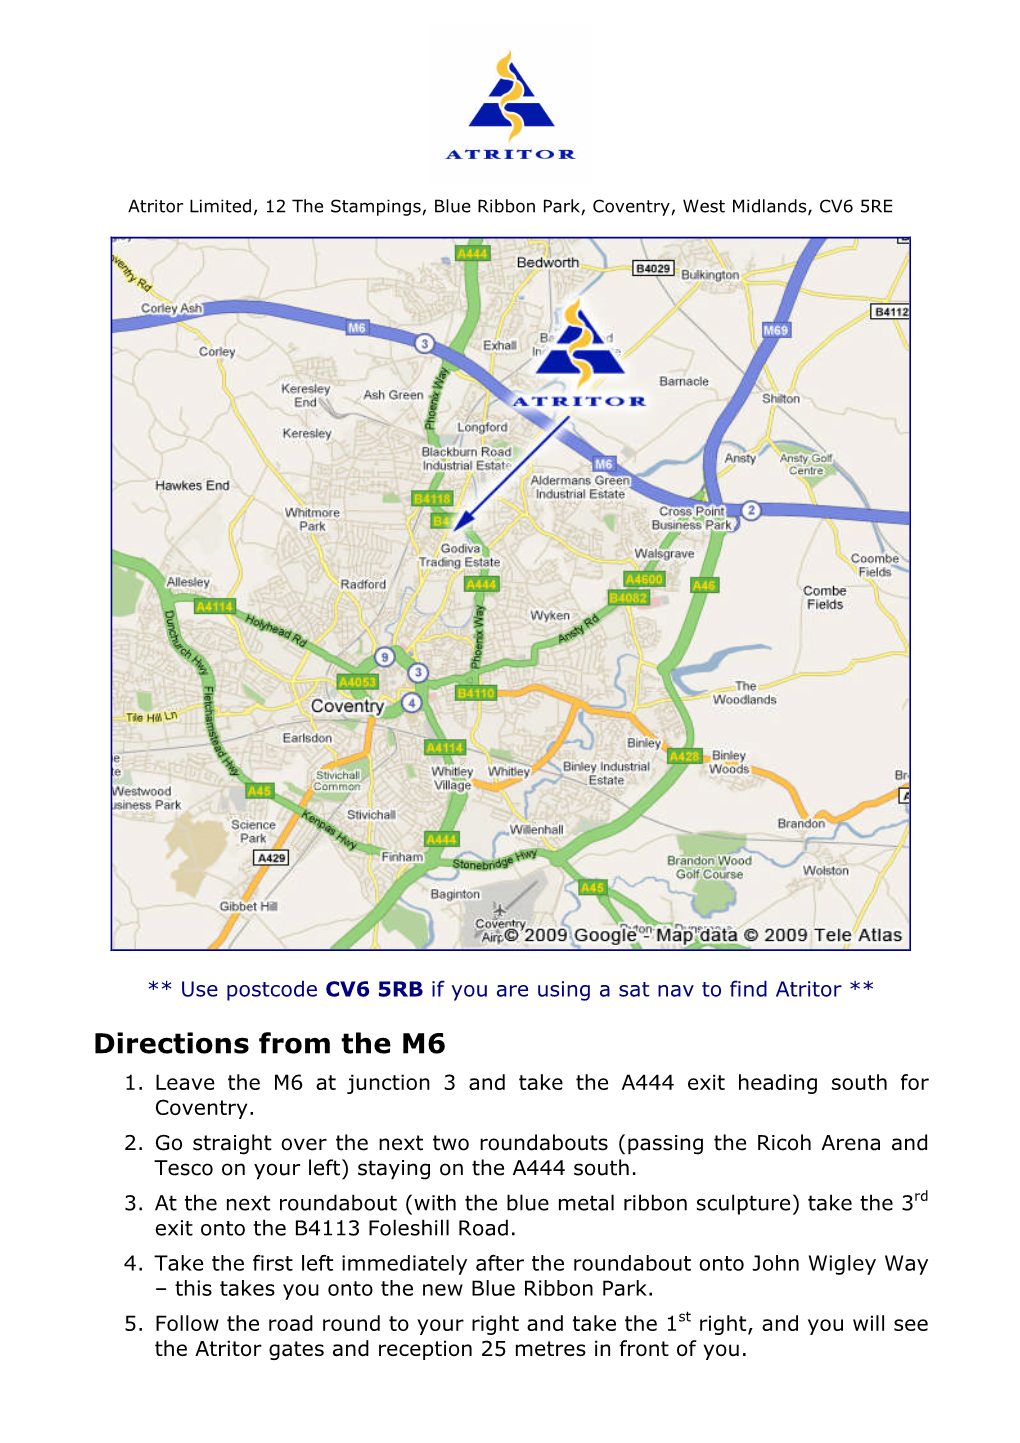 Directions from the M6 1